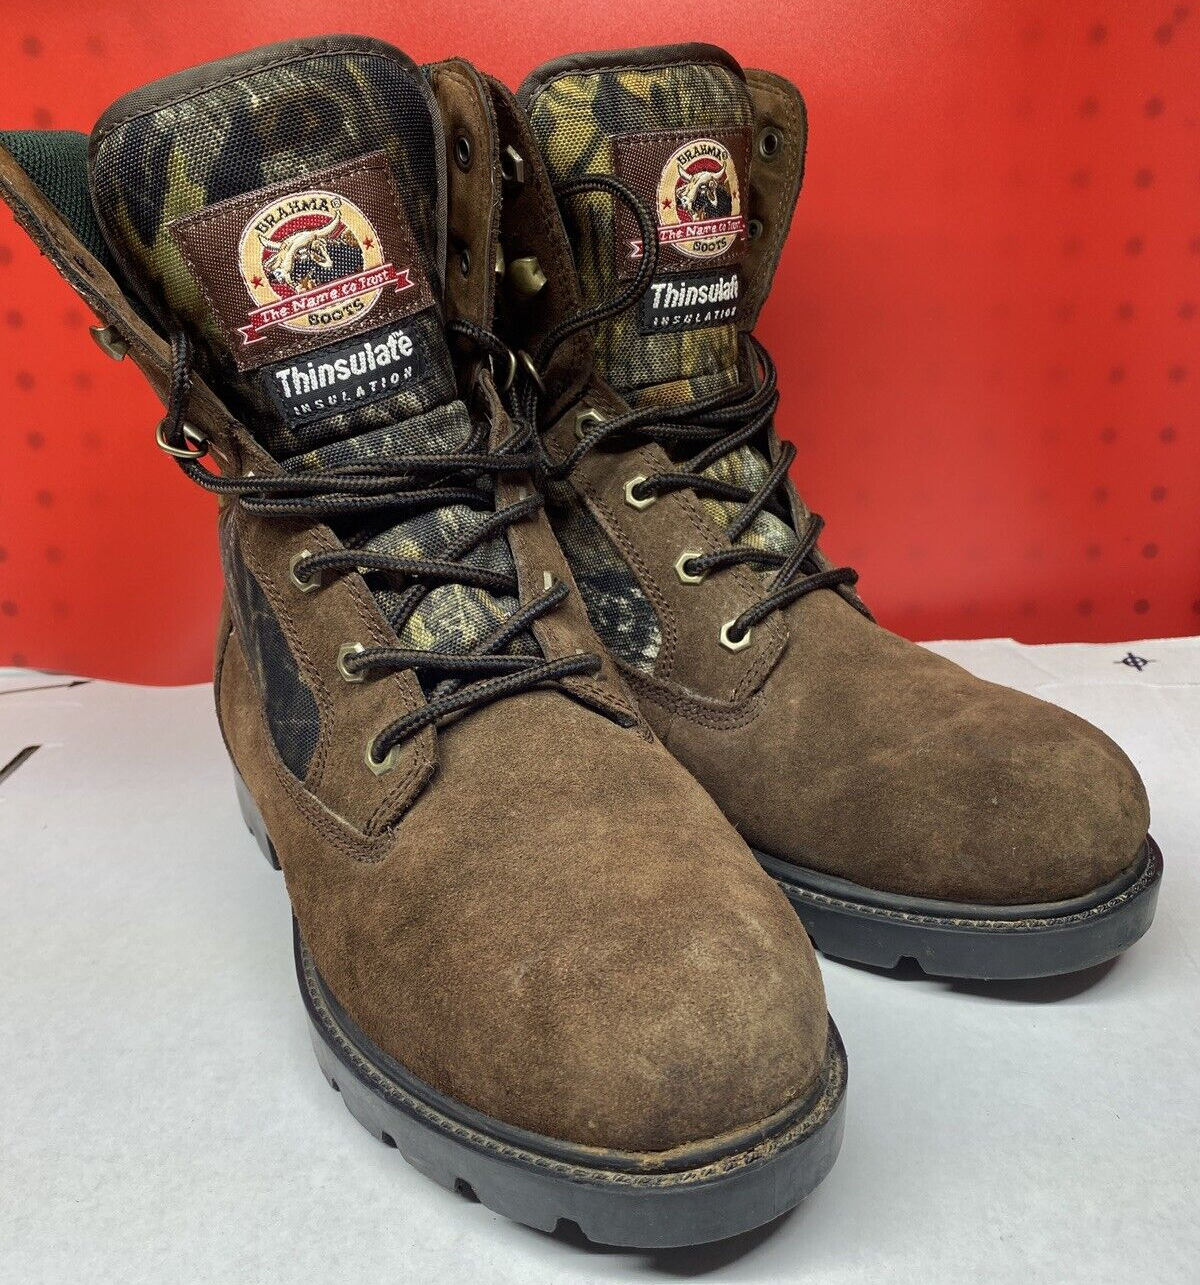 Primary image for Brahma Hunter Men's Camo and Brown Boots Size 8